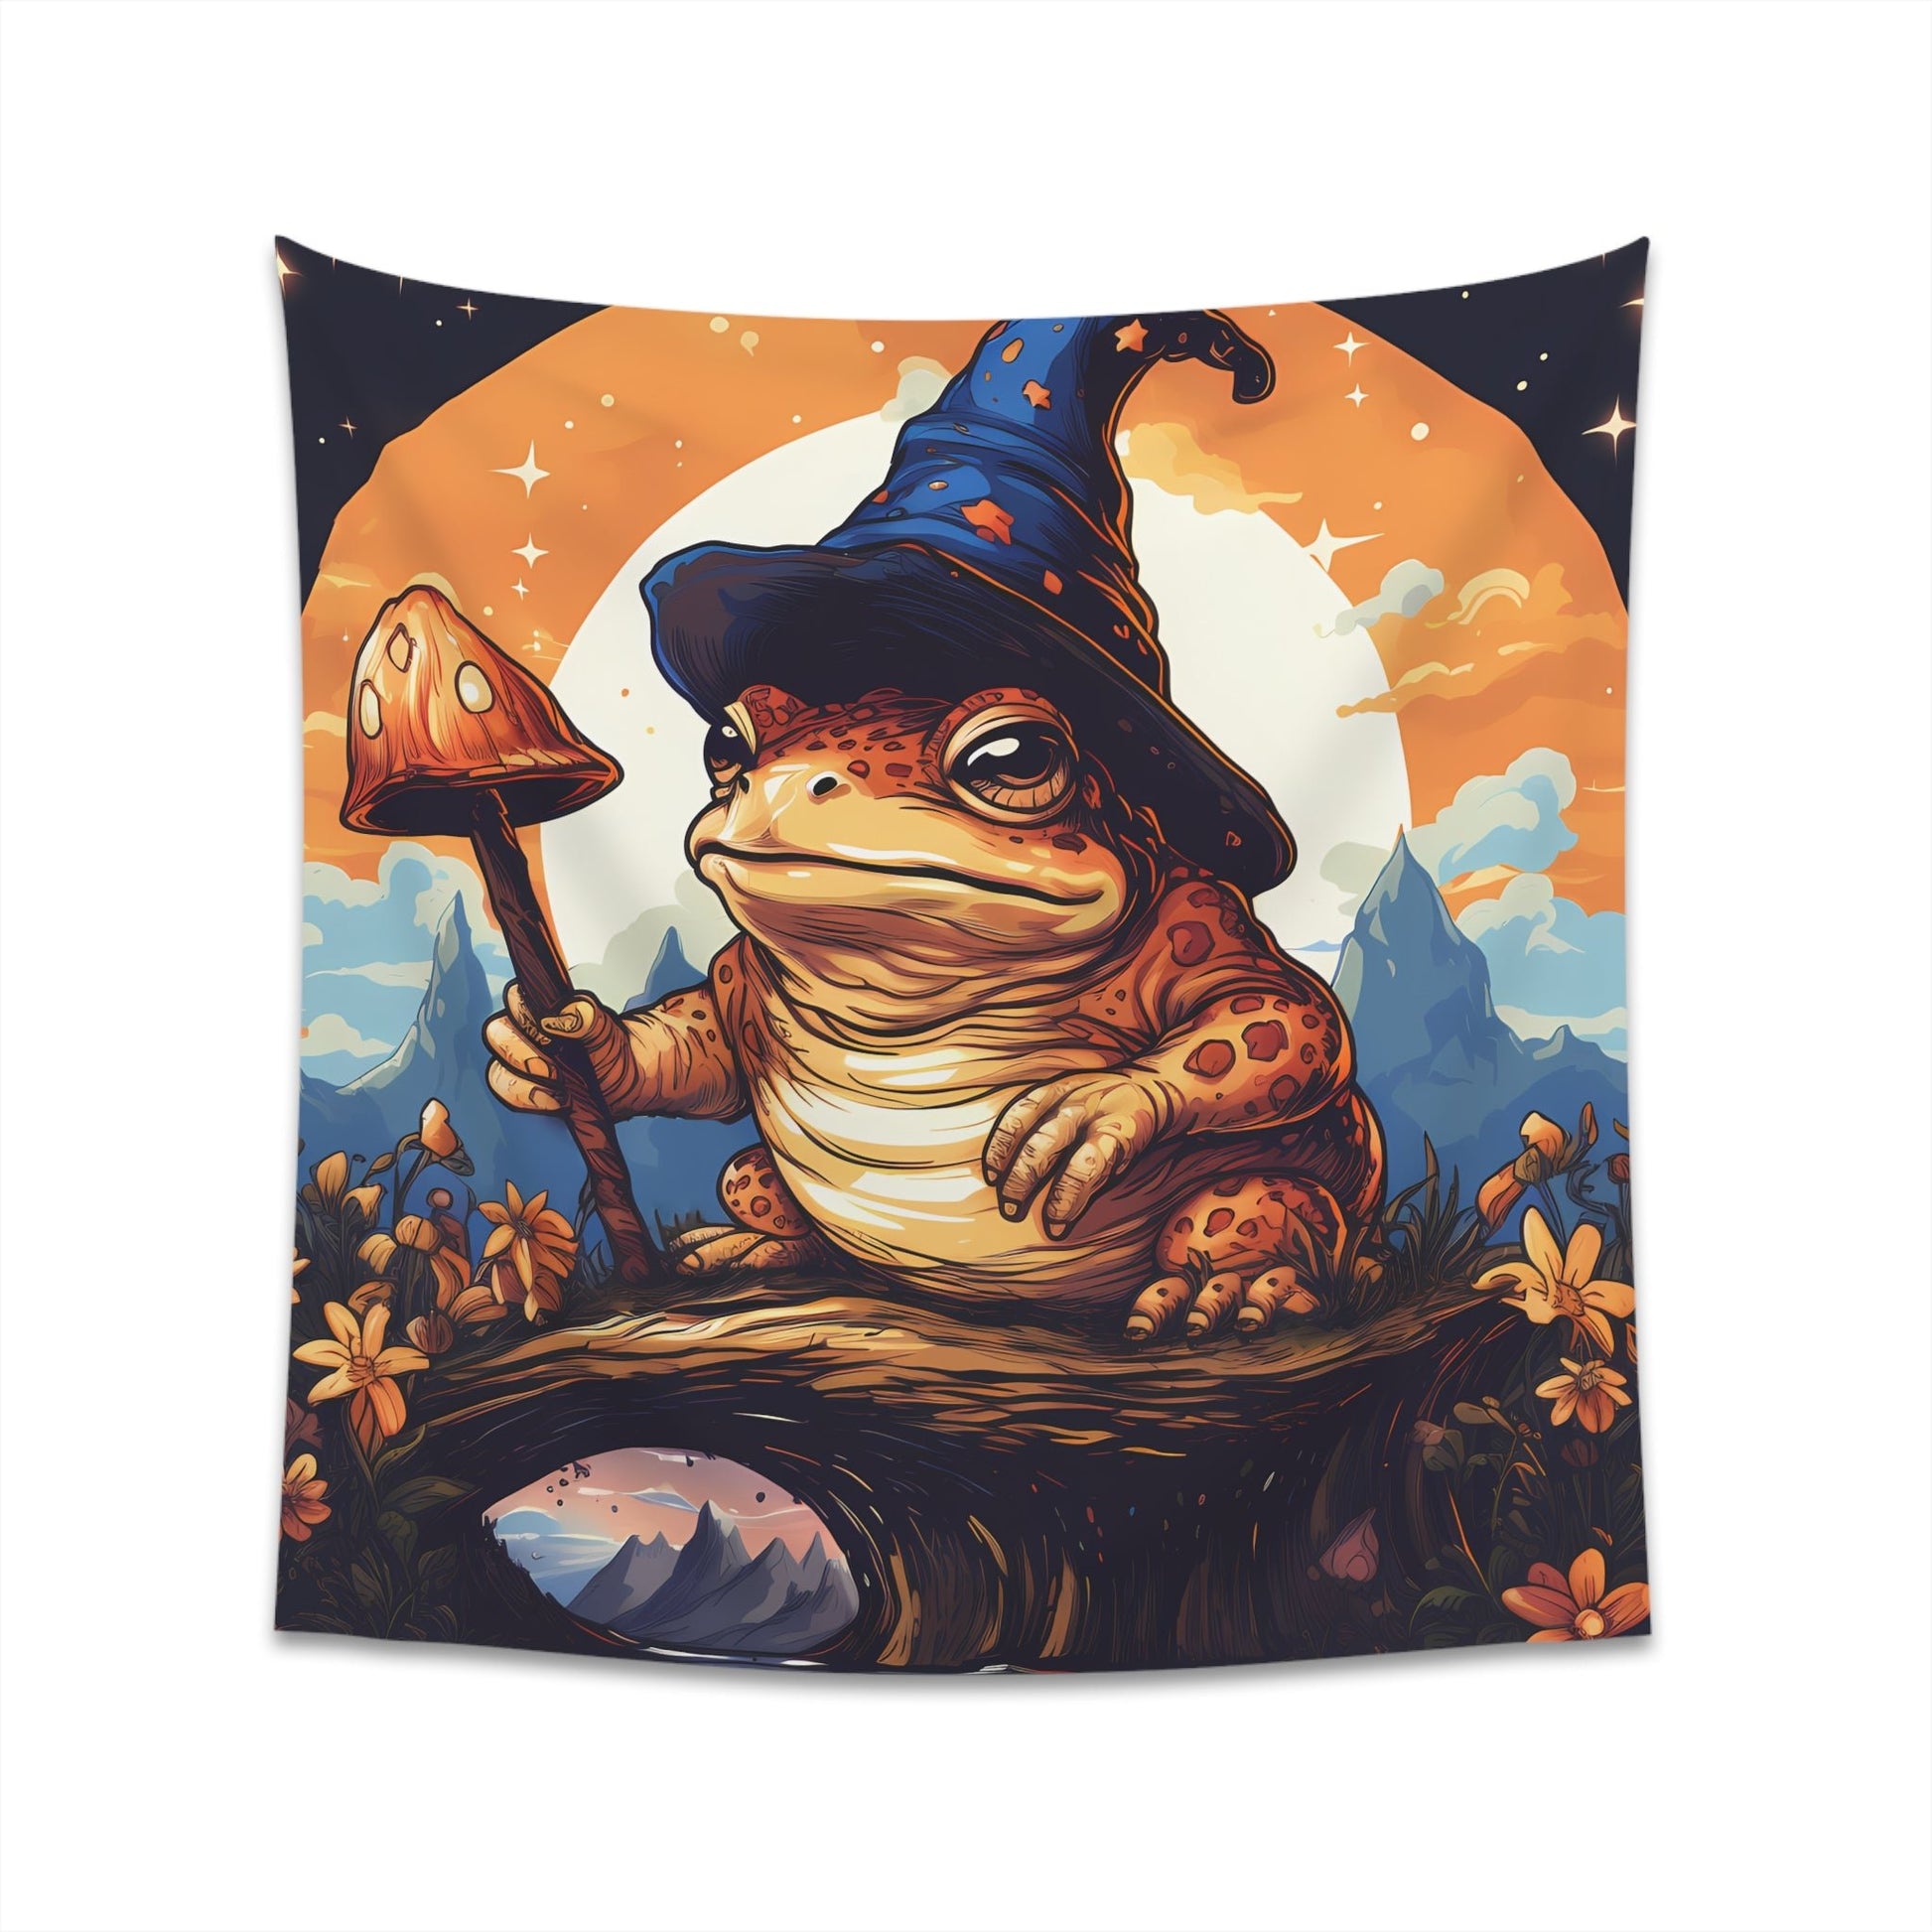 Wizard Toad With Mushroom Wand Printed Wall TapestryHome DecorVTZdesigns34" × 40"All Over PrintAOPcottage core